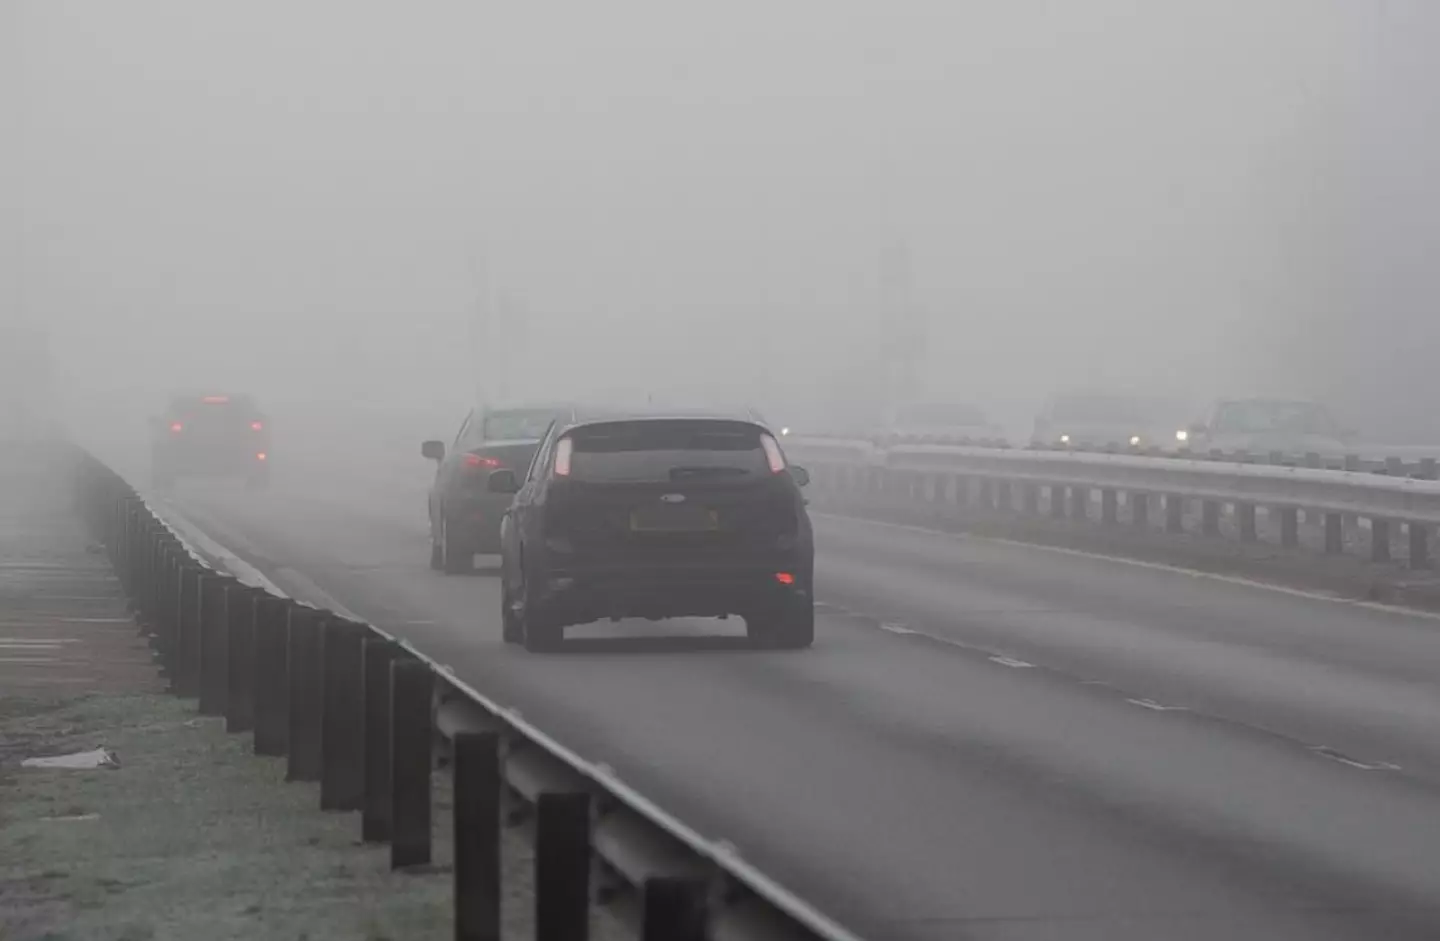 Experts recommend to avoid driving in freezing fog if possible.